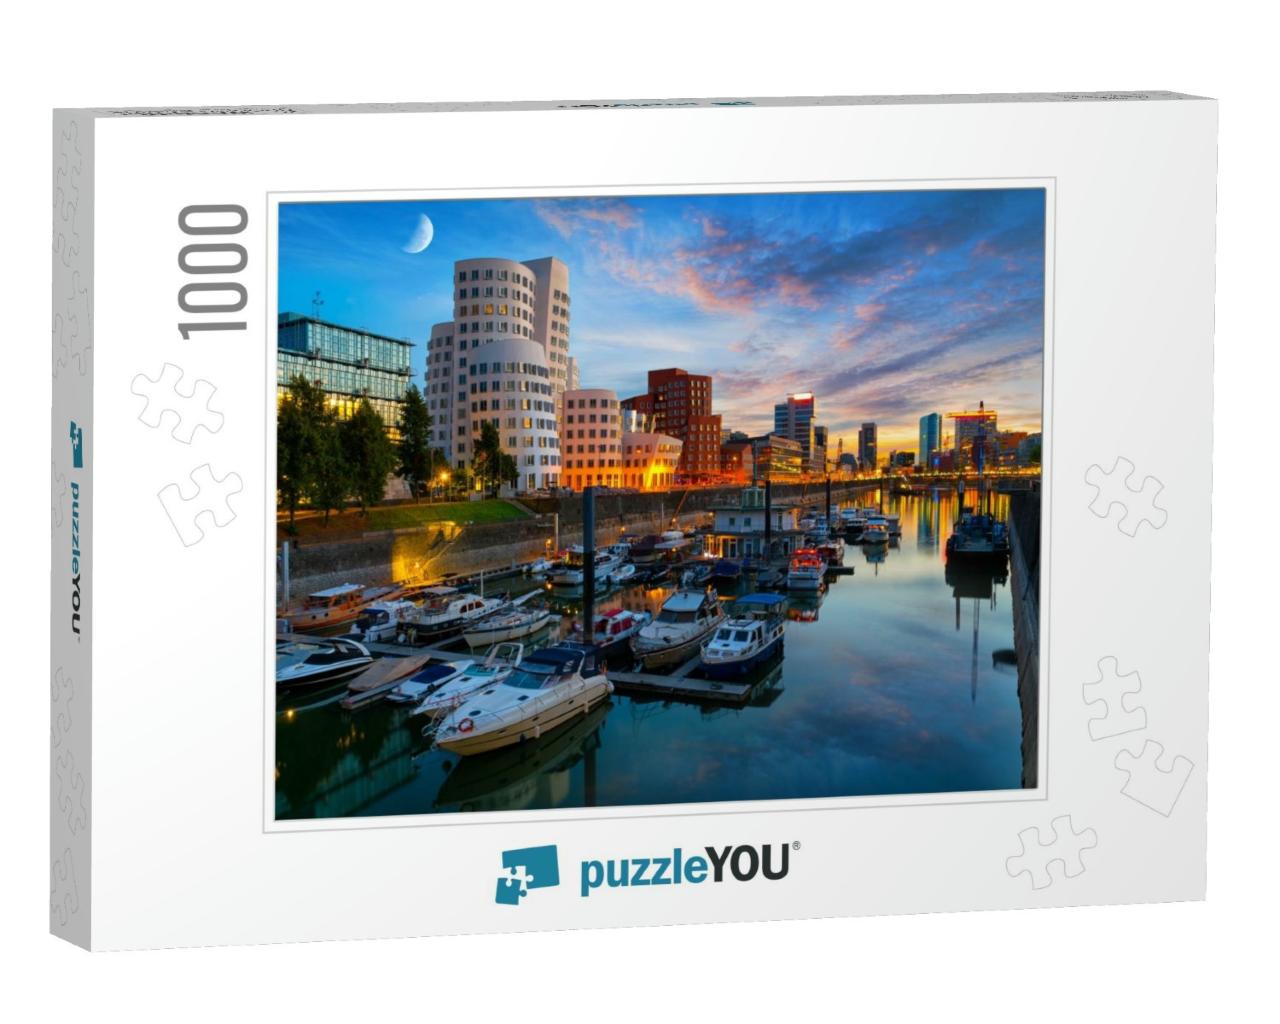 Dusseldorf Media Harbor... Jigsaw Puzzle with 1000 pieces